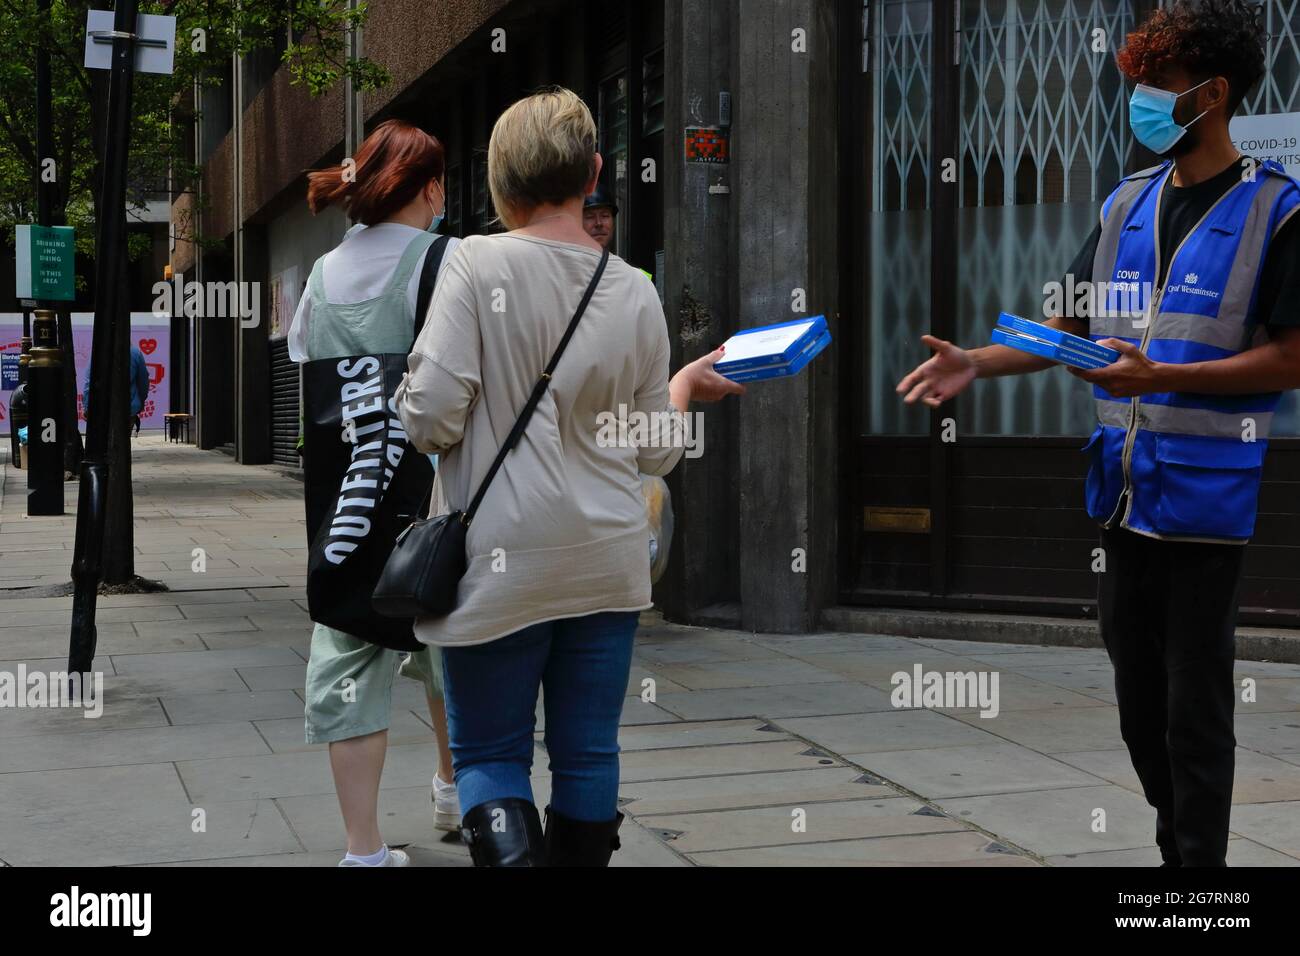 Londom (UK), 14 July 2021: An NHS support worker hands out covid self testing kits to members of the public on the streets of central London Stock Photo